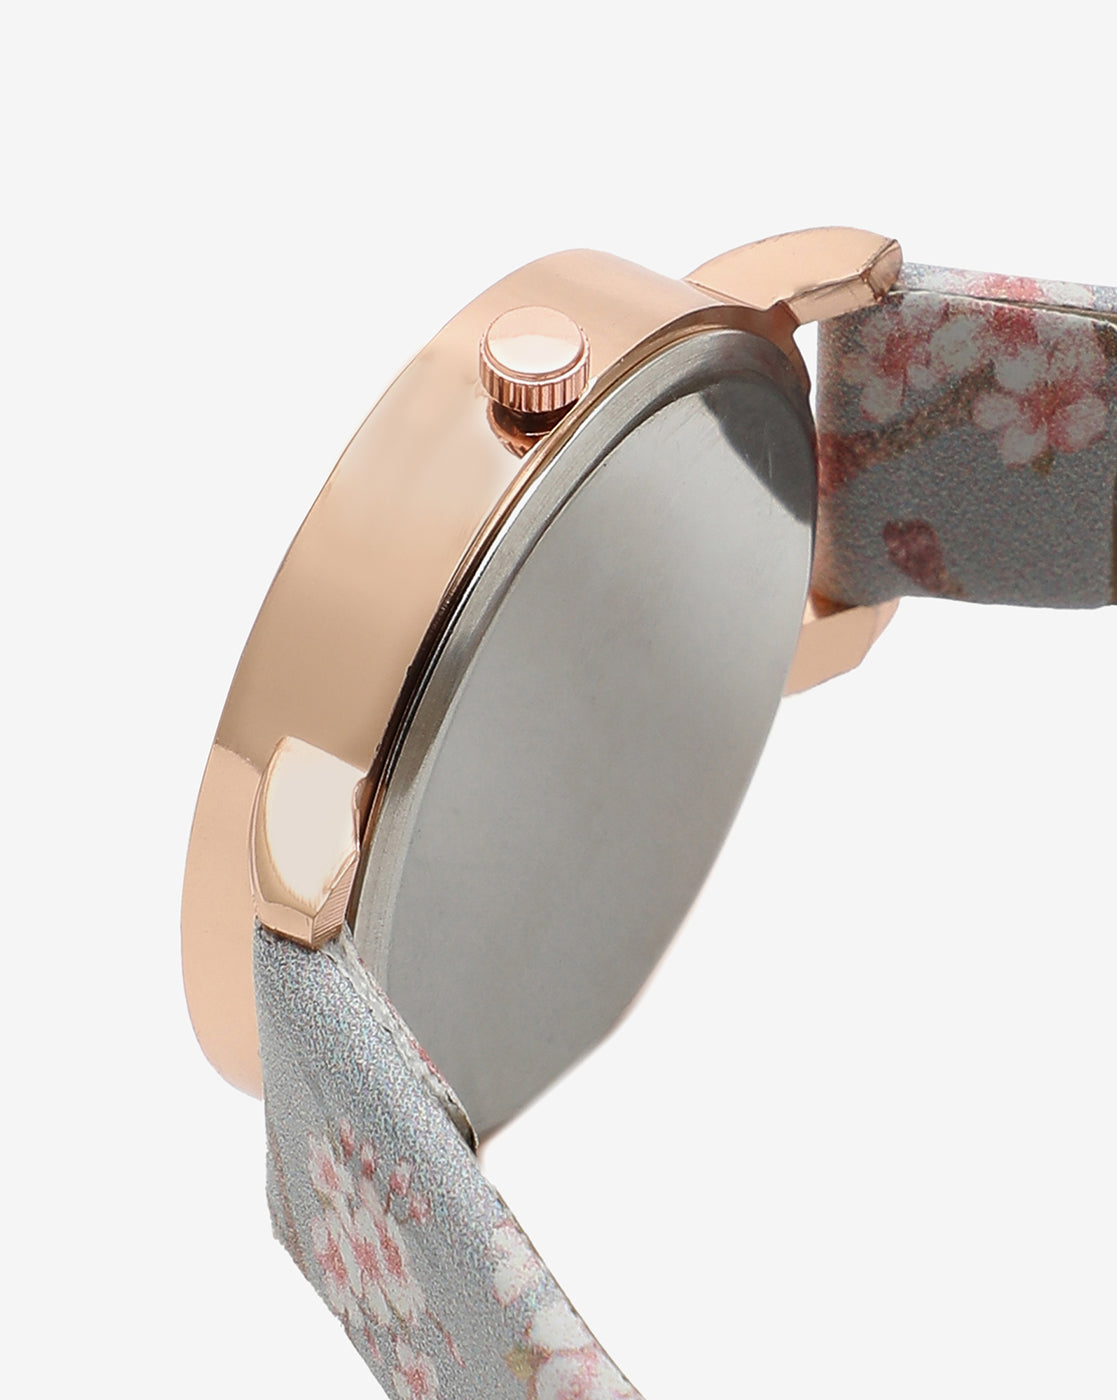 GREY AND CHAMPAGNE GOLD DECORATIVE ANALOG ROUND DIAL WITH FLORAL PRINTED LEATHER STRAP